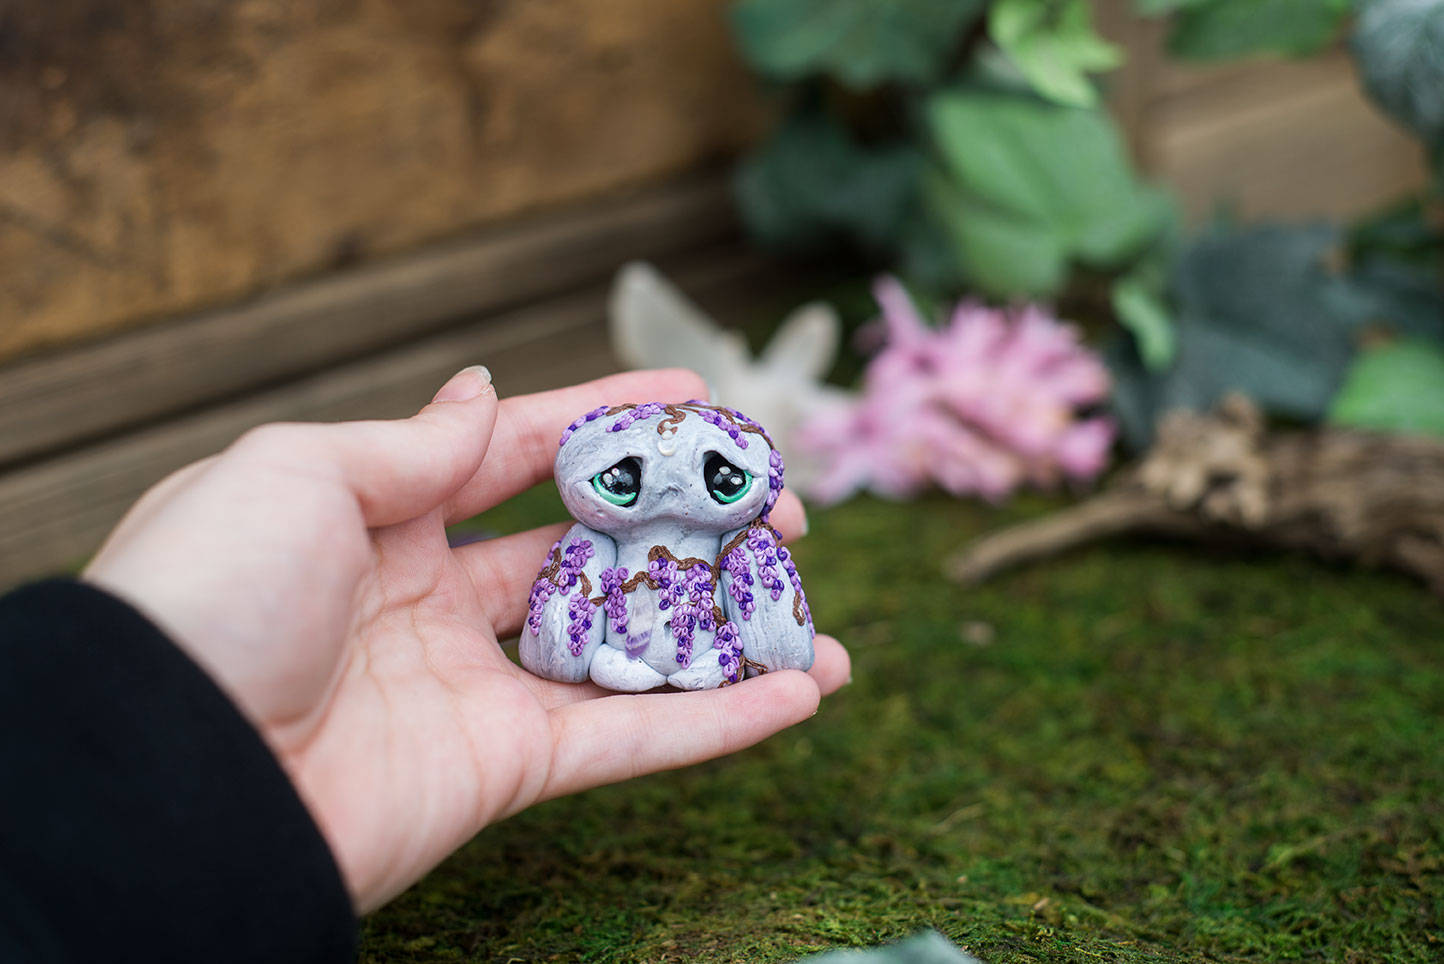 Marble w/ Wisteria Rock Golem Mish - OOAK collectible handmade polymer clay art toy gift